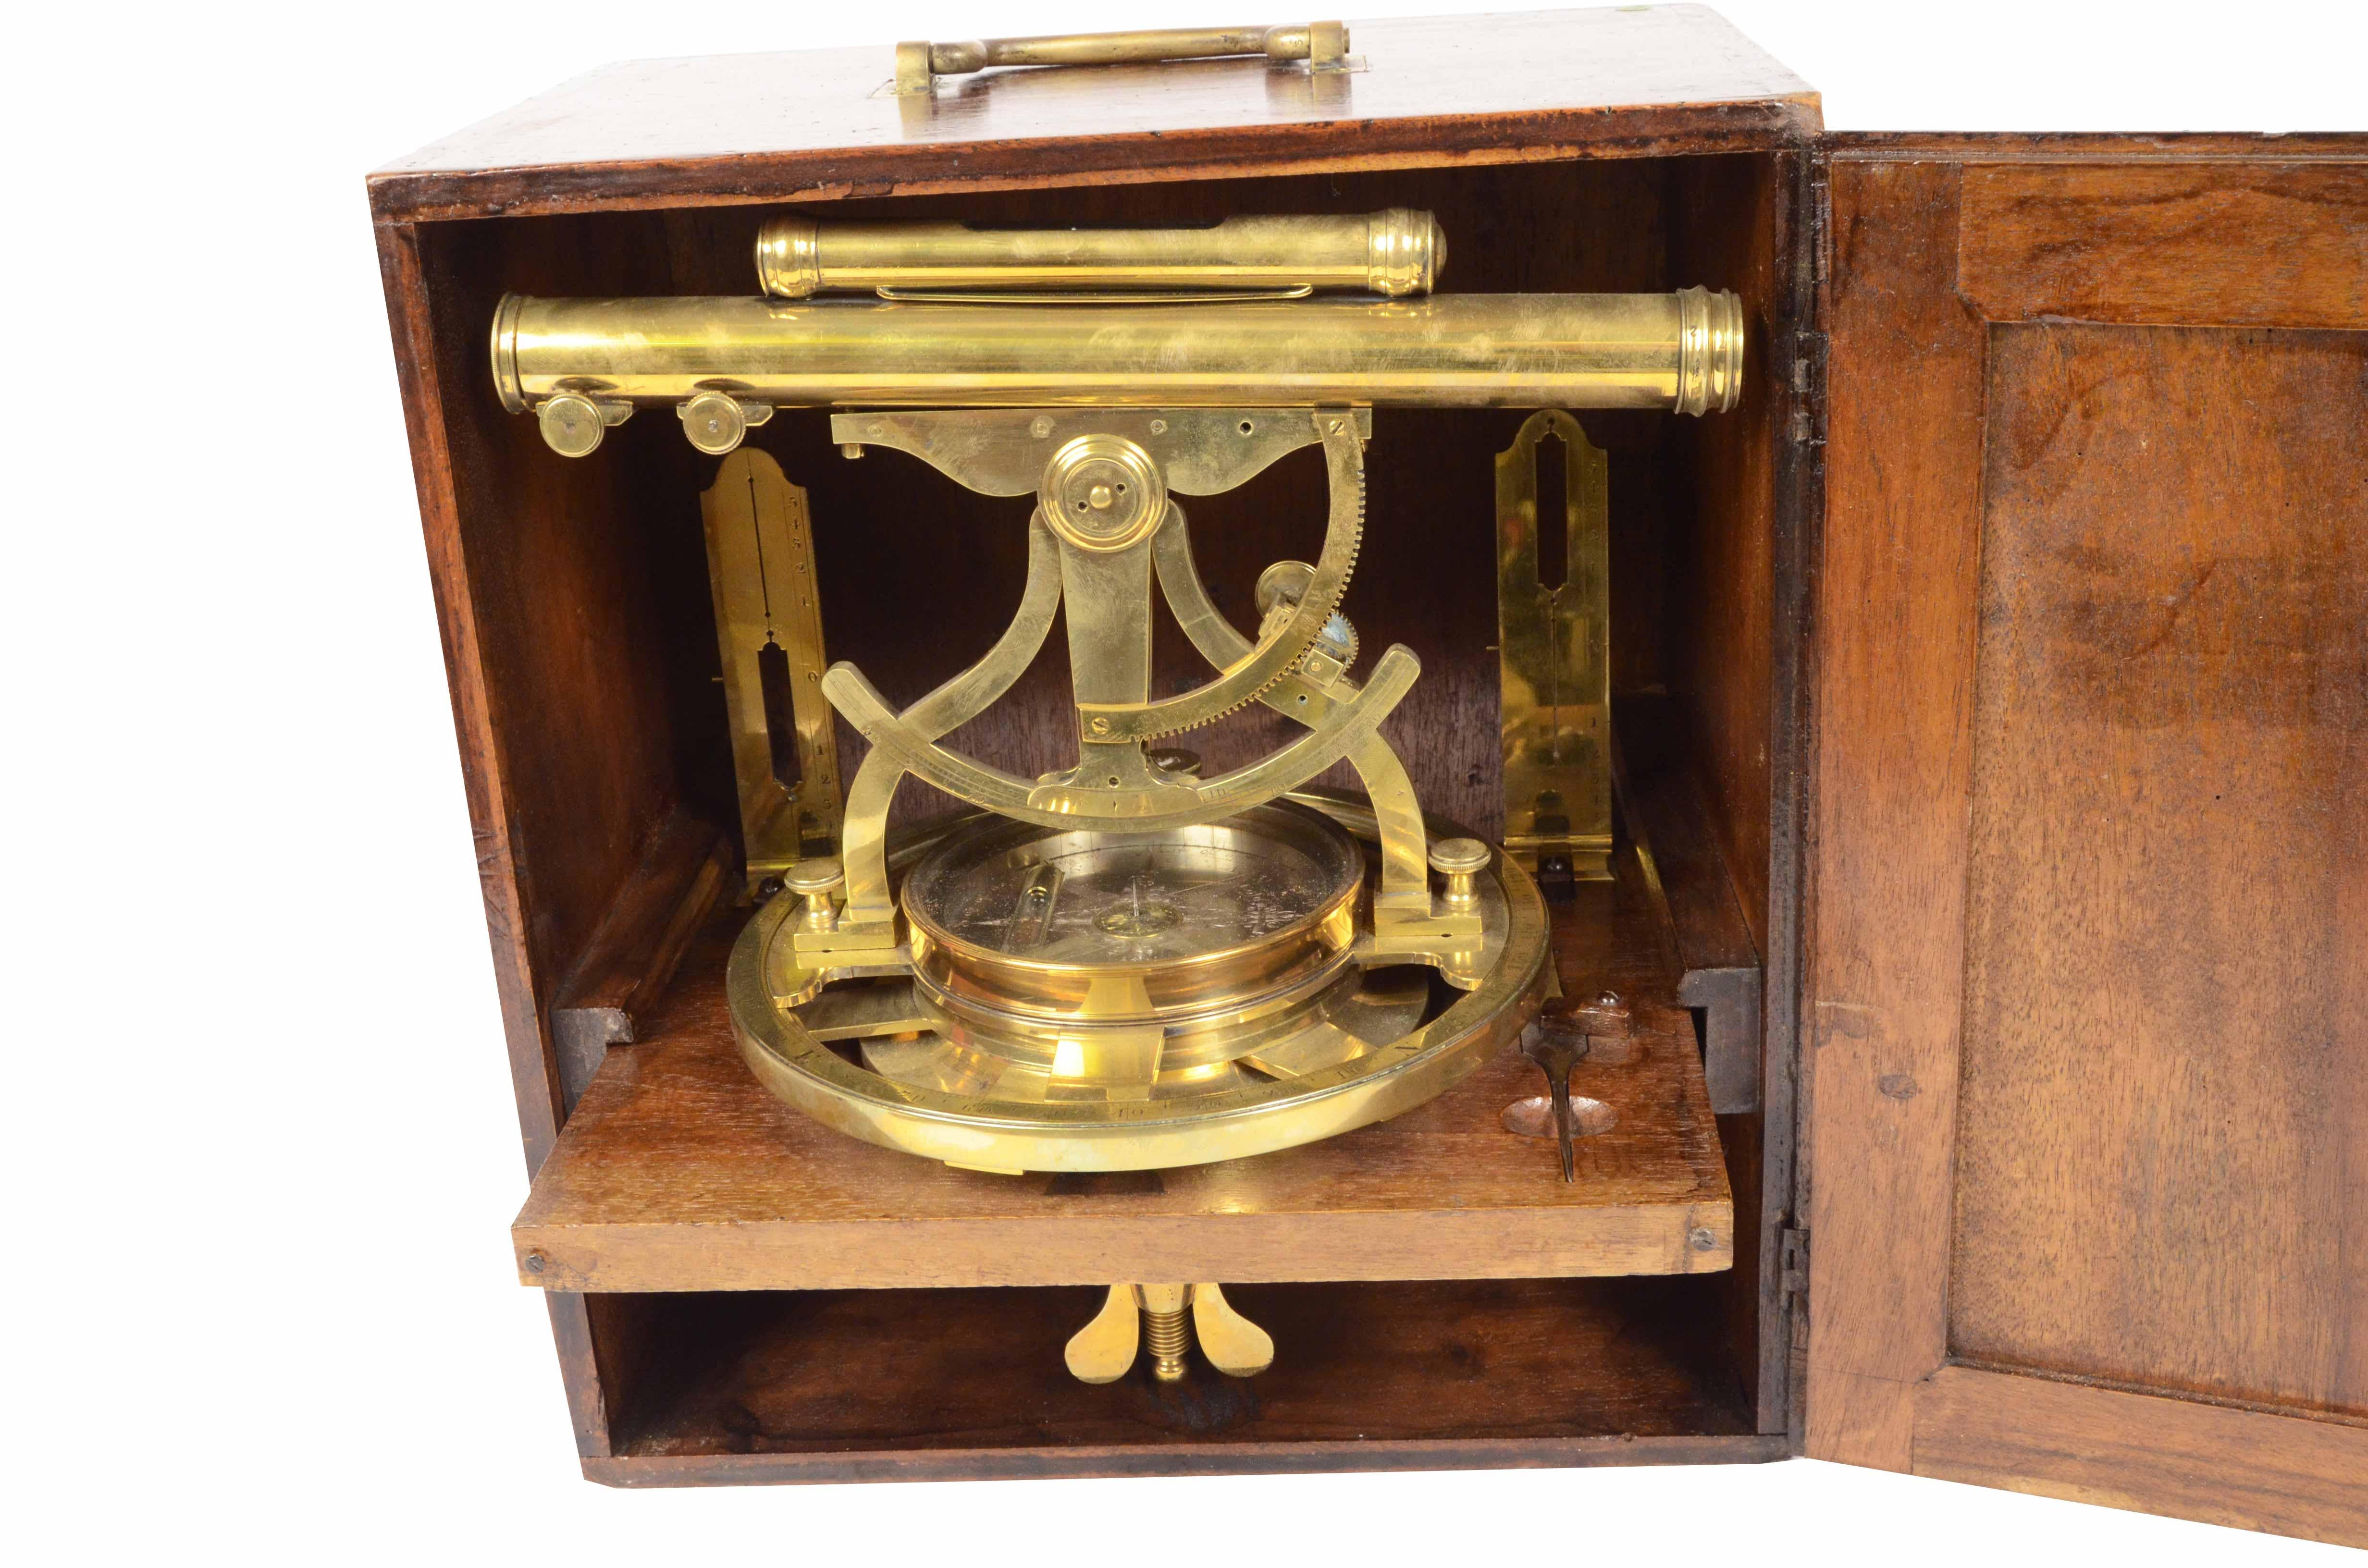 Brass theodolite signed Cole Fecit from the mid-18th century complete with brass graduated sights that can be replaced with a telescope and original wooden box. The instrument is fixed on a wooden tablet with 4 display feet. Instrument used for